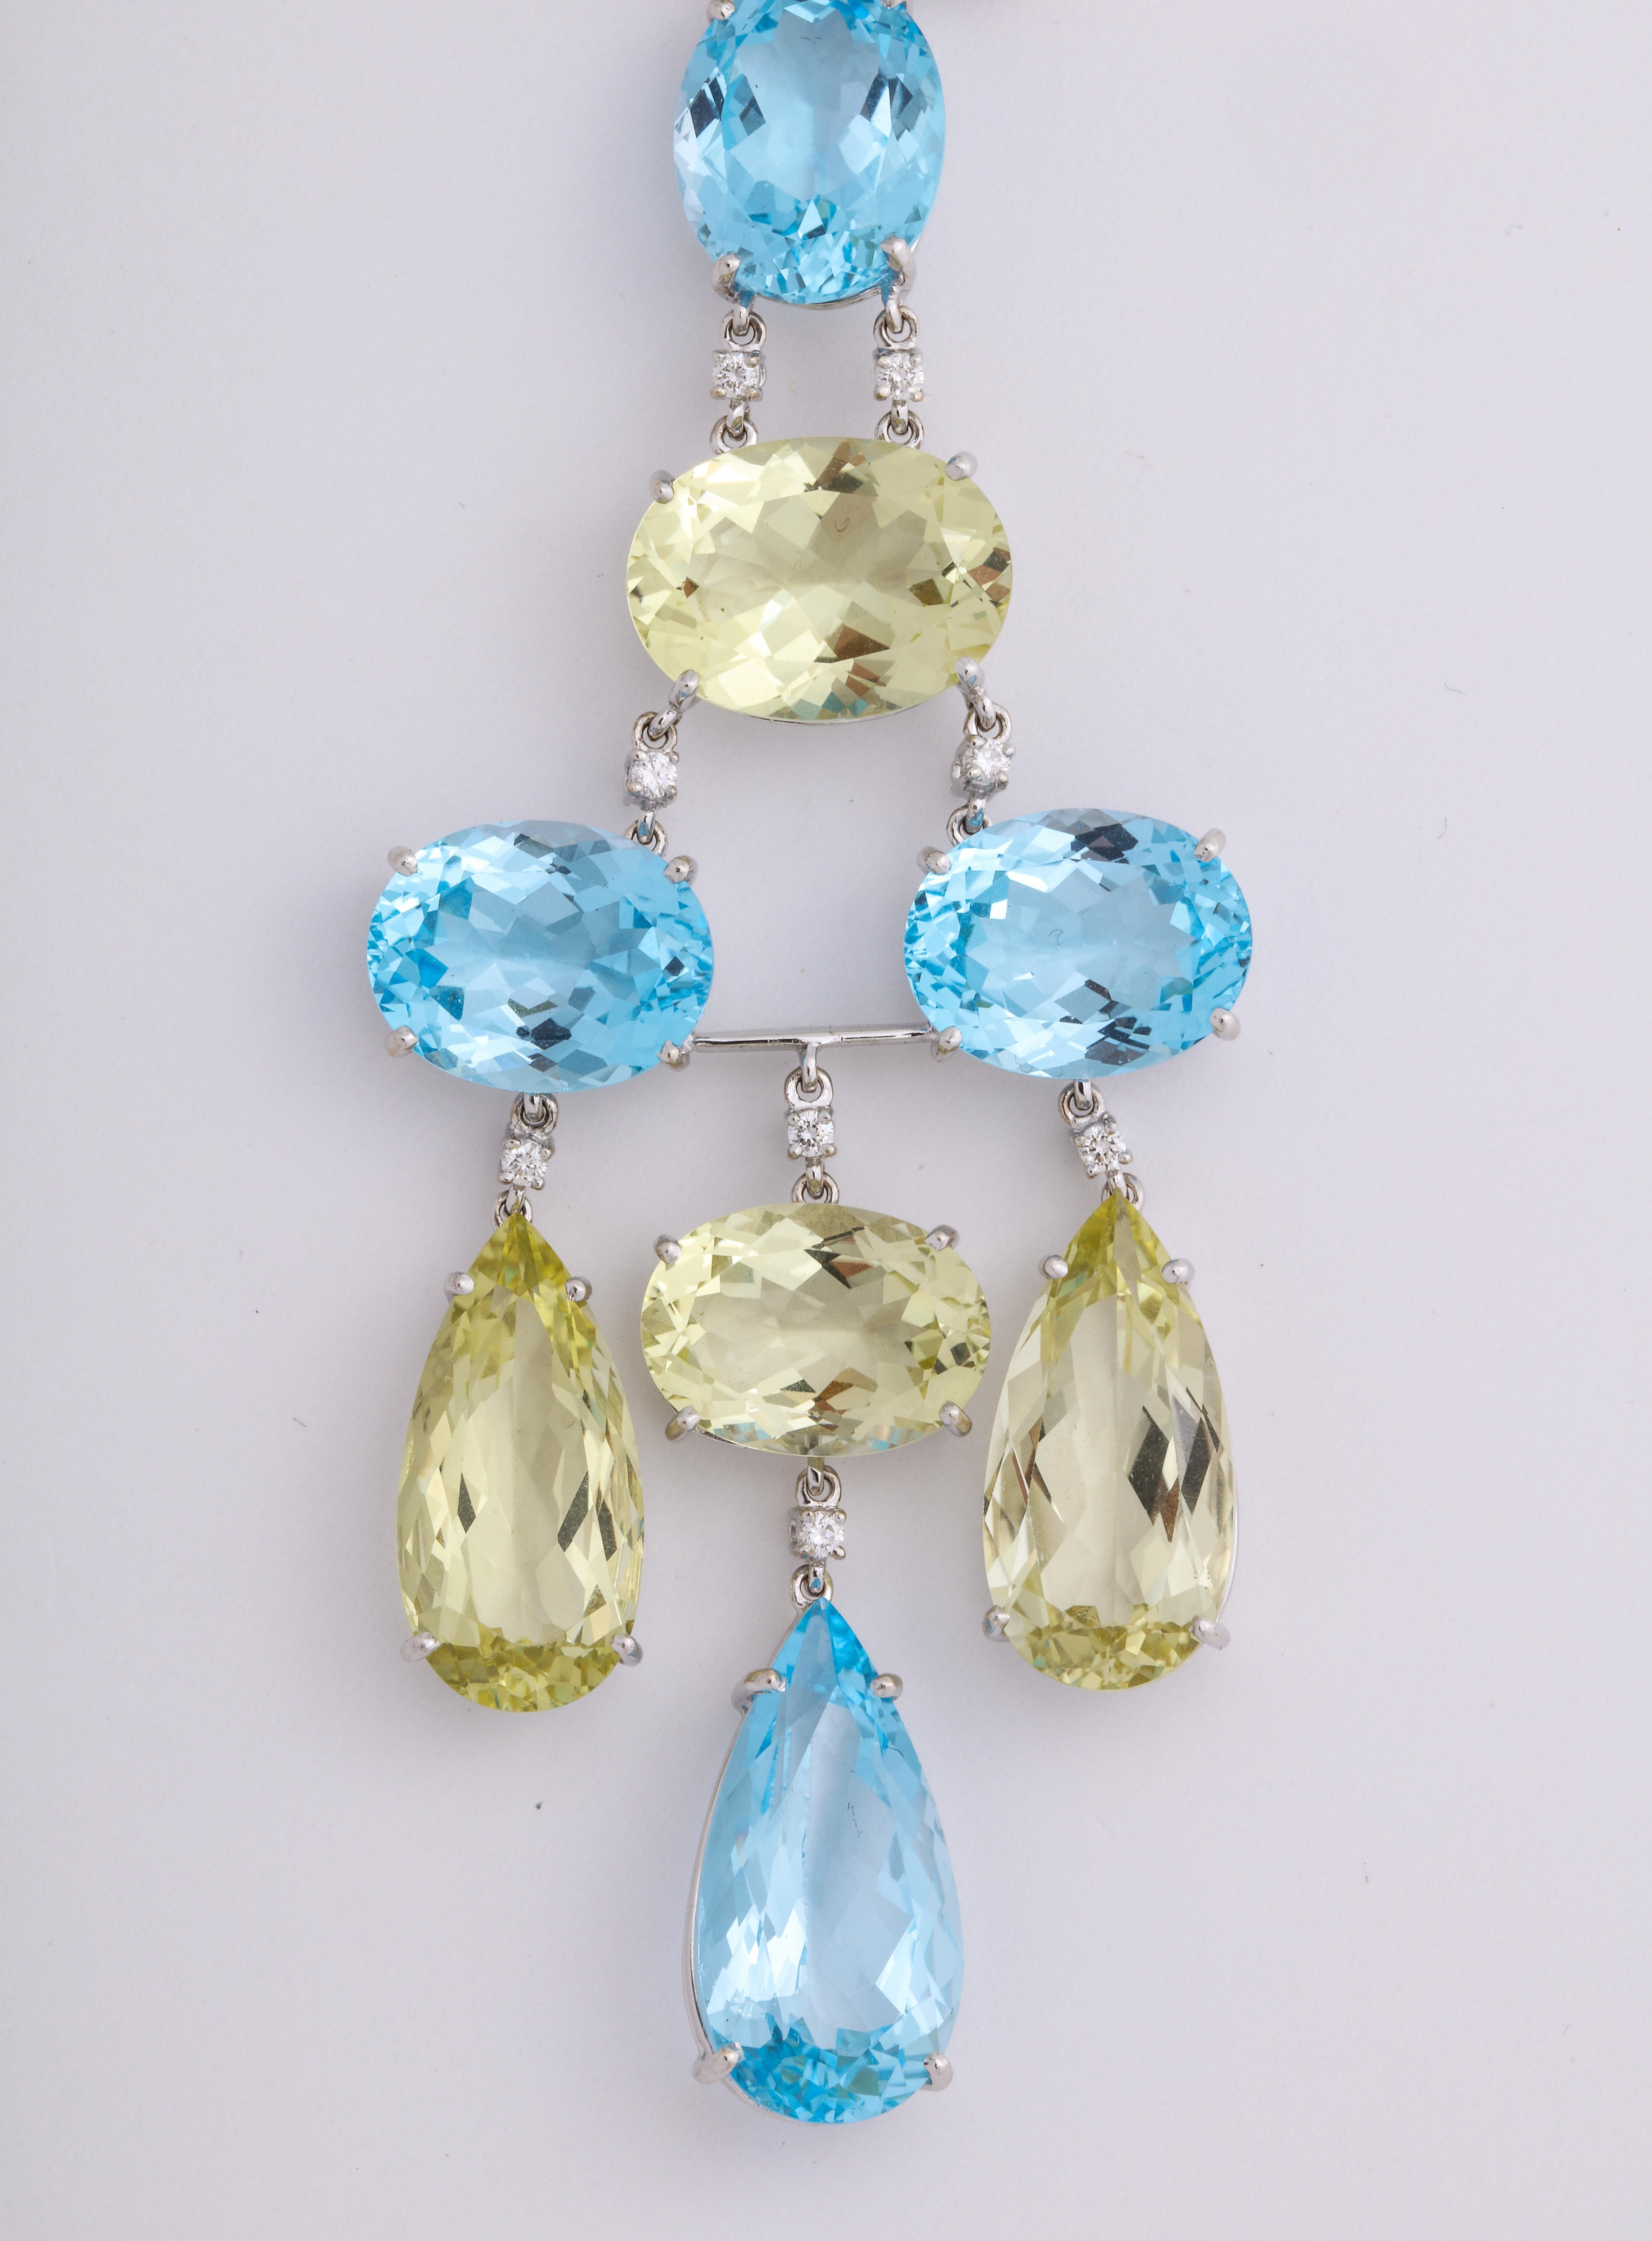 Contemporary White Gold, Blue Topaz, Peridot and Diamond Chandelier Earrings For Sale